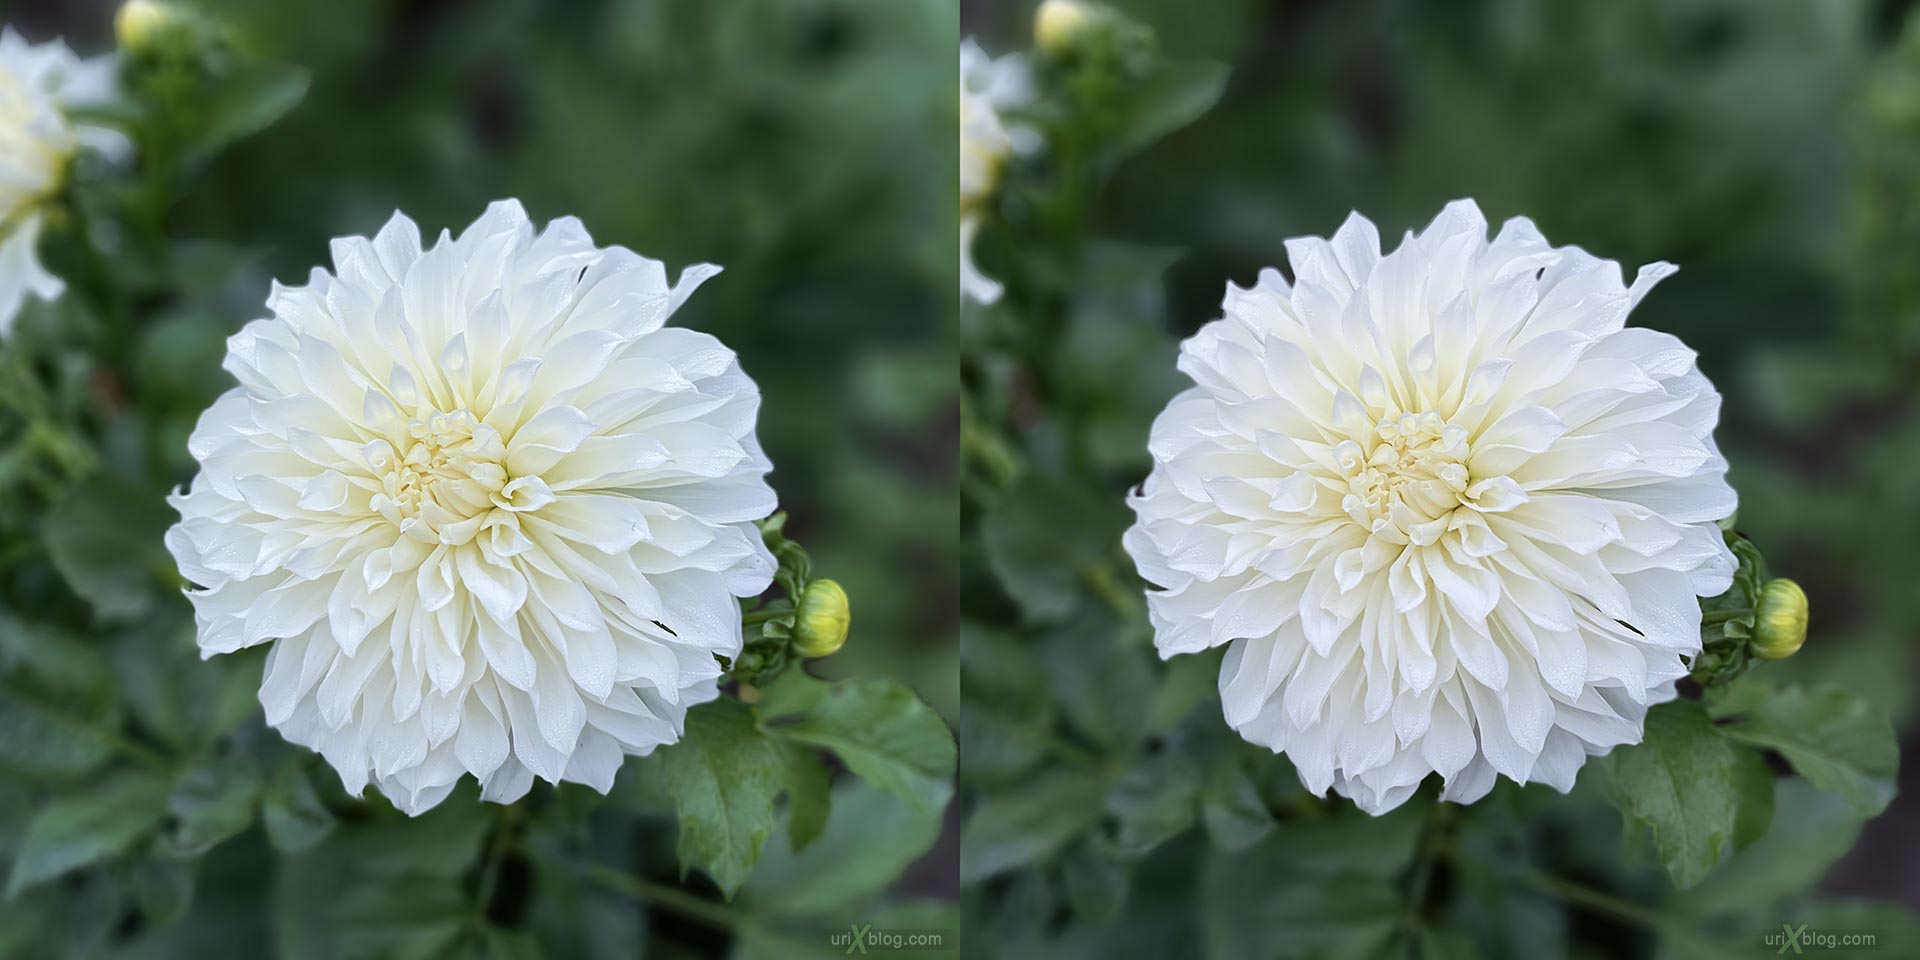 flower, bud, flowers, Apothecary garden, botanical garden, Moscow, Russia, 3D, stereo pair, cross-eyed, crossview, cross view stereo pair, stereoscopic